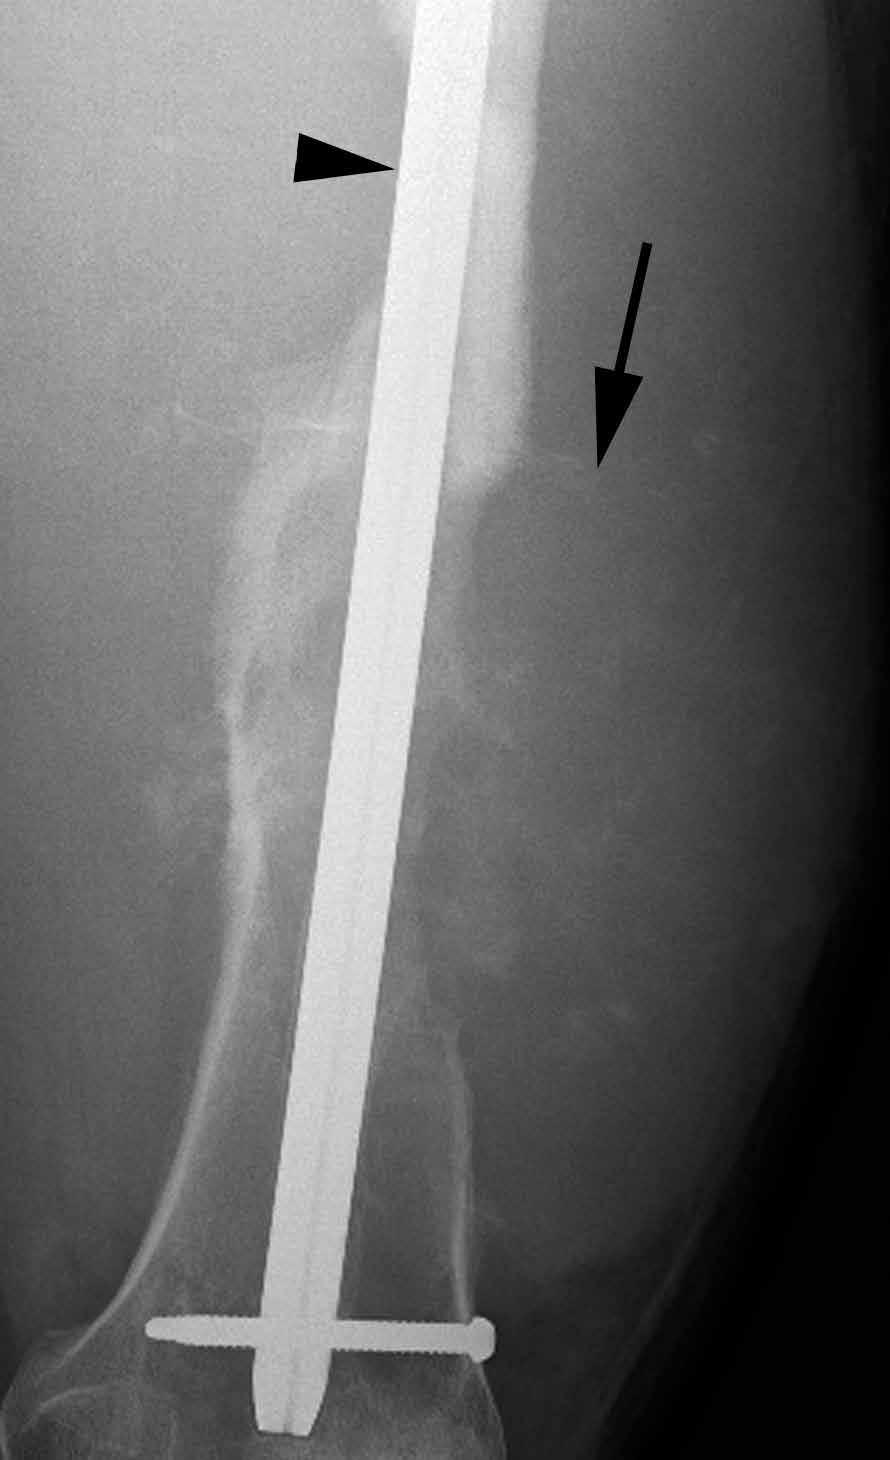 enlargement of soft-tissue mass (arrows), again concerning for a highly aggressive, rapidly progressive osteosarcoma.